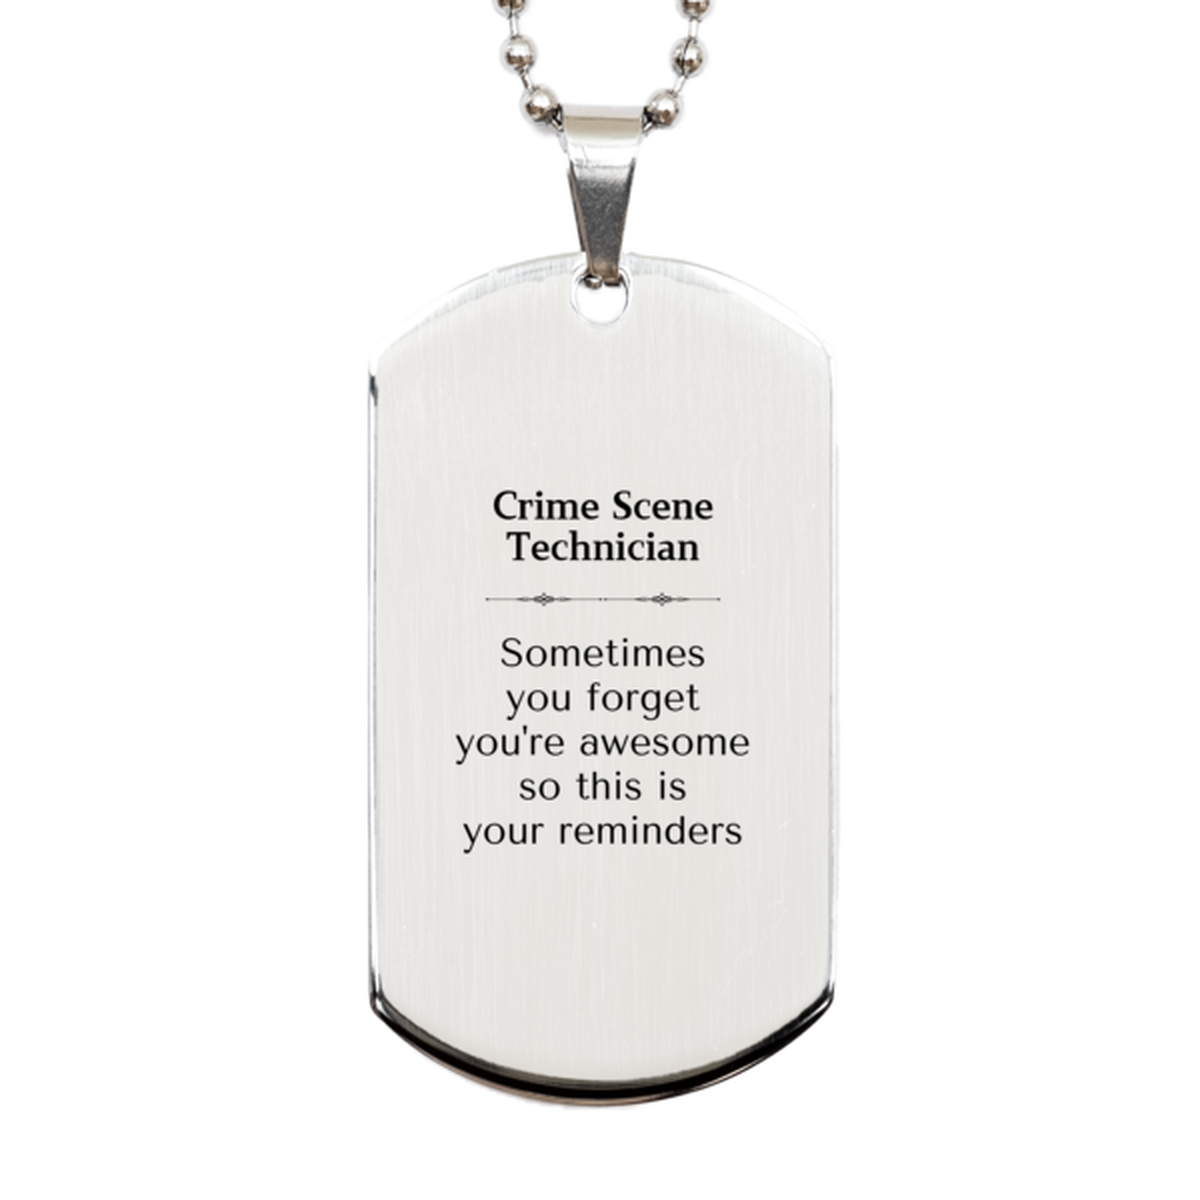 Sentimental Crime Scene Technician Silver Dog Tag, Crime Scene Technician Sometimes you forget you're awesome so this is your reminders, Graduation Christmas Birthday Gifts for Crime Scene Technician, Men, Women, Coworkers